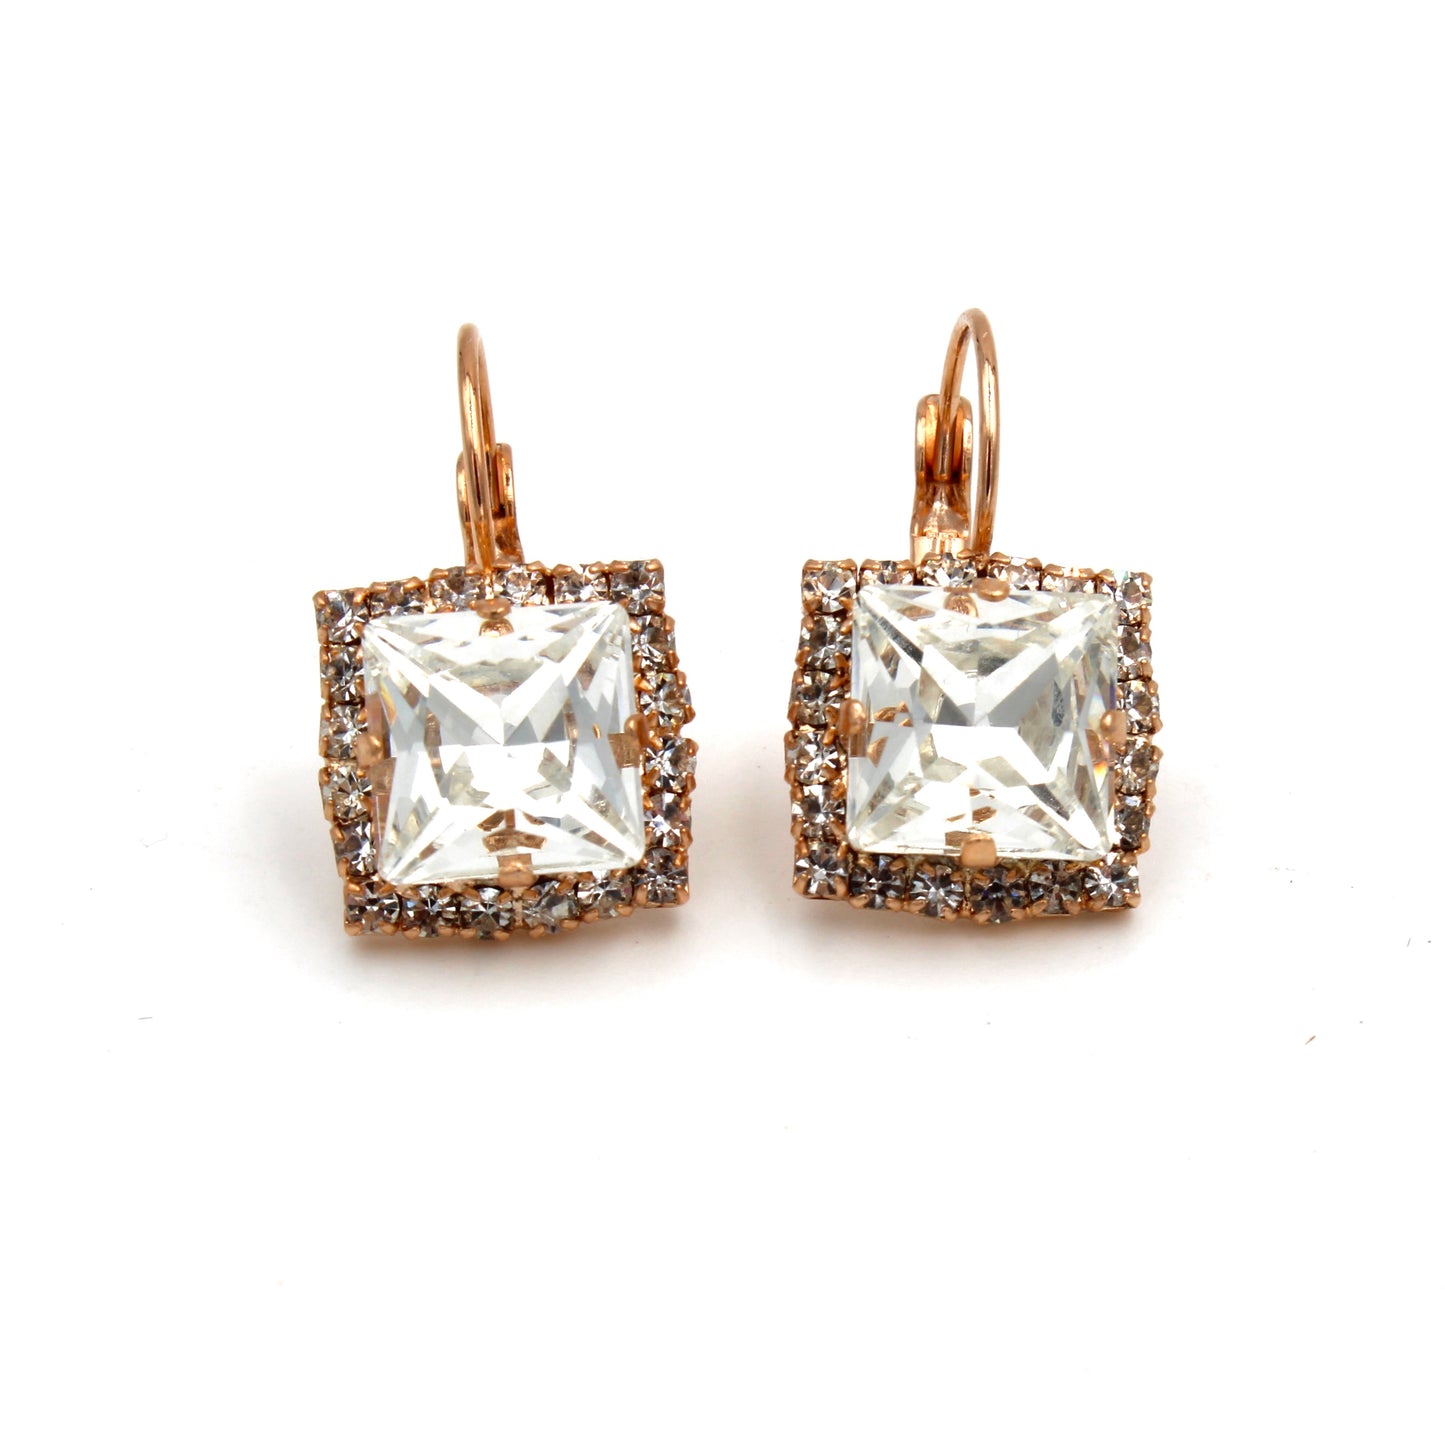 Magic Rock Square Crystal Earrings by LaHola in Rose Gold - MaryTyke's